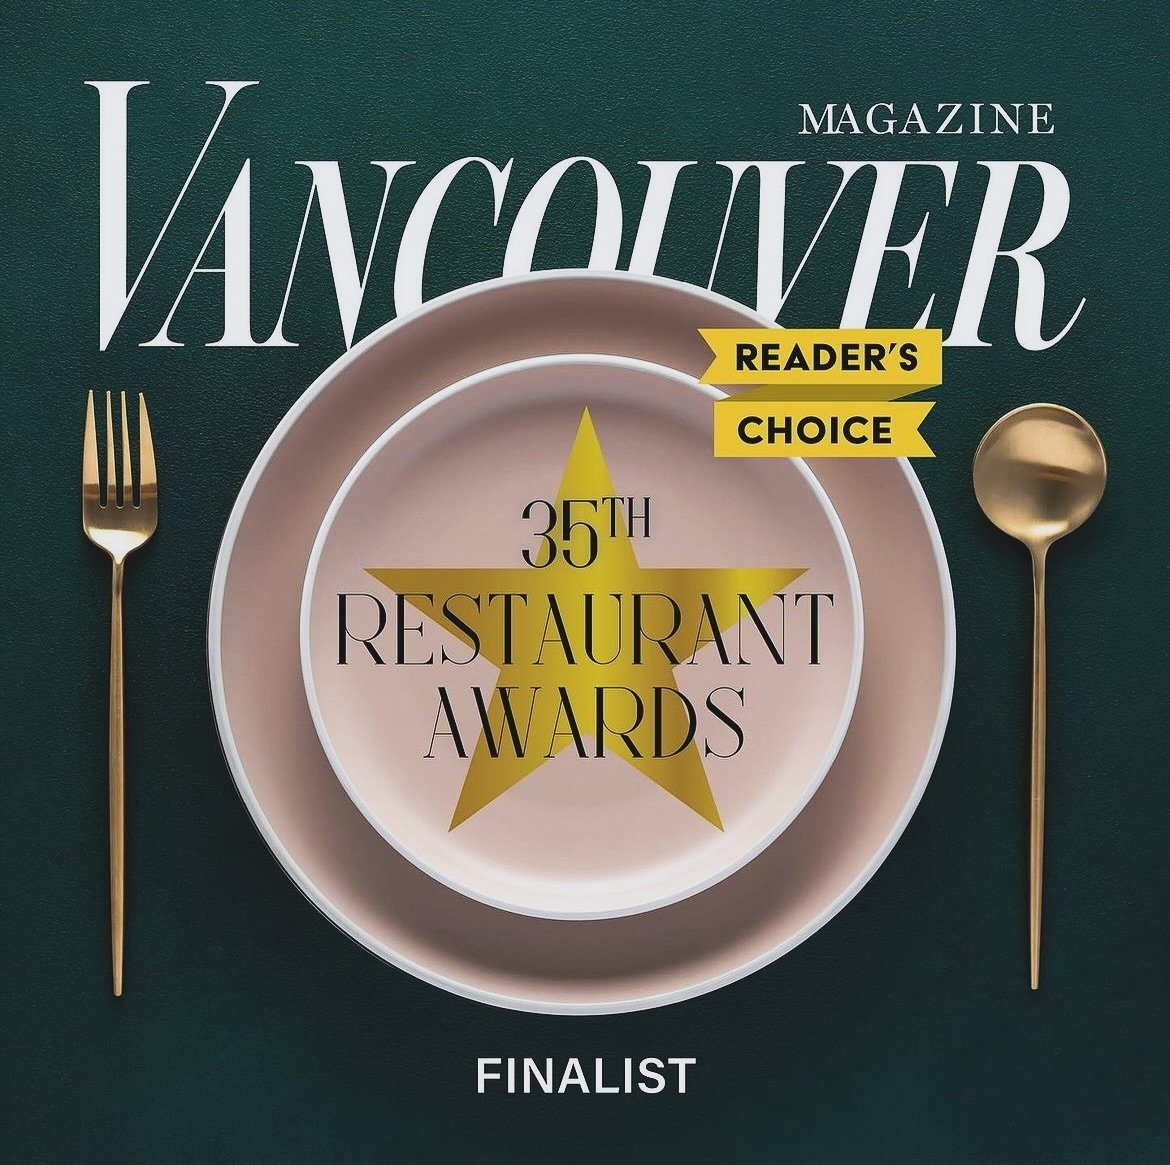 We are honoured to be nominated for best food truck in Vancouver and would love your vote! 

Voting is open until Friday and you can find the link on the top of our page. 

Really appreciate the support everyone has shown us over the last 3 years! 

